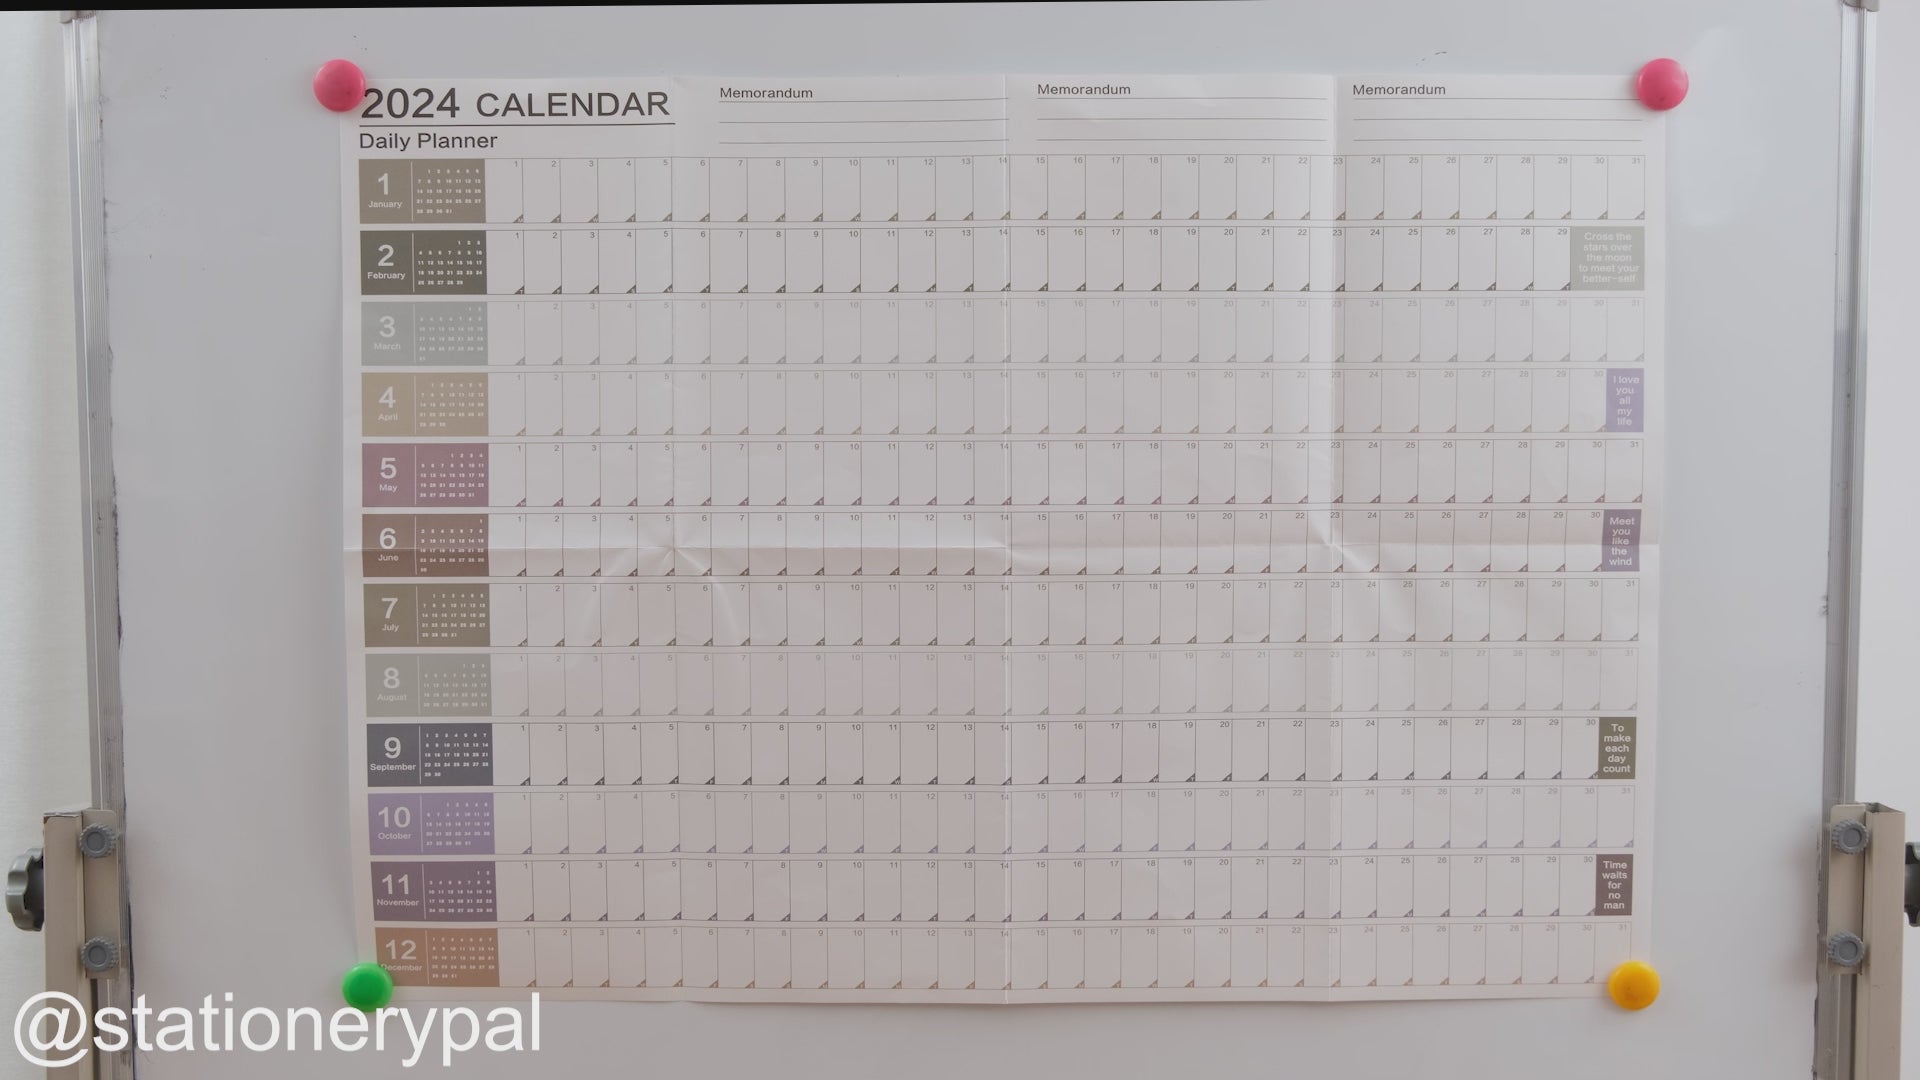 2024 Calendar with Daily Planner